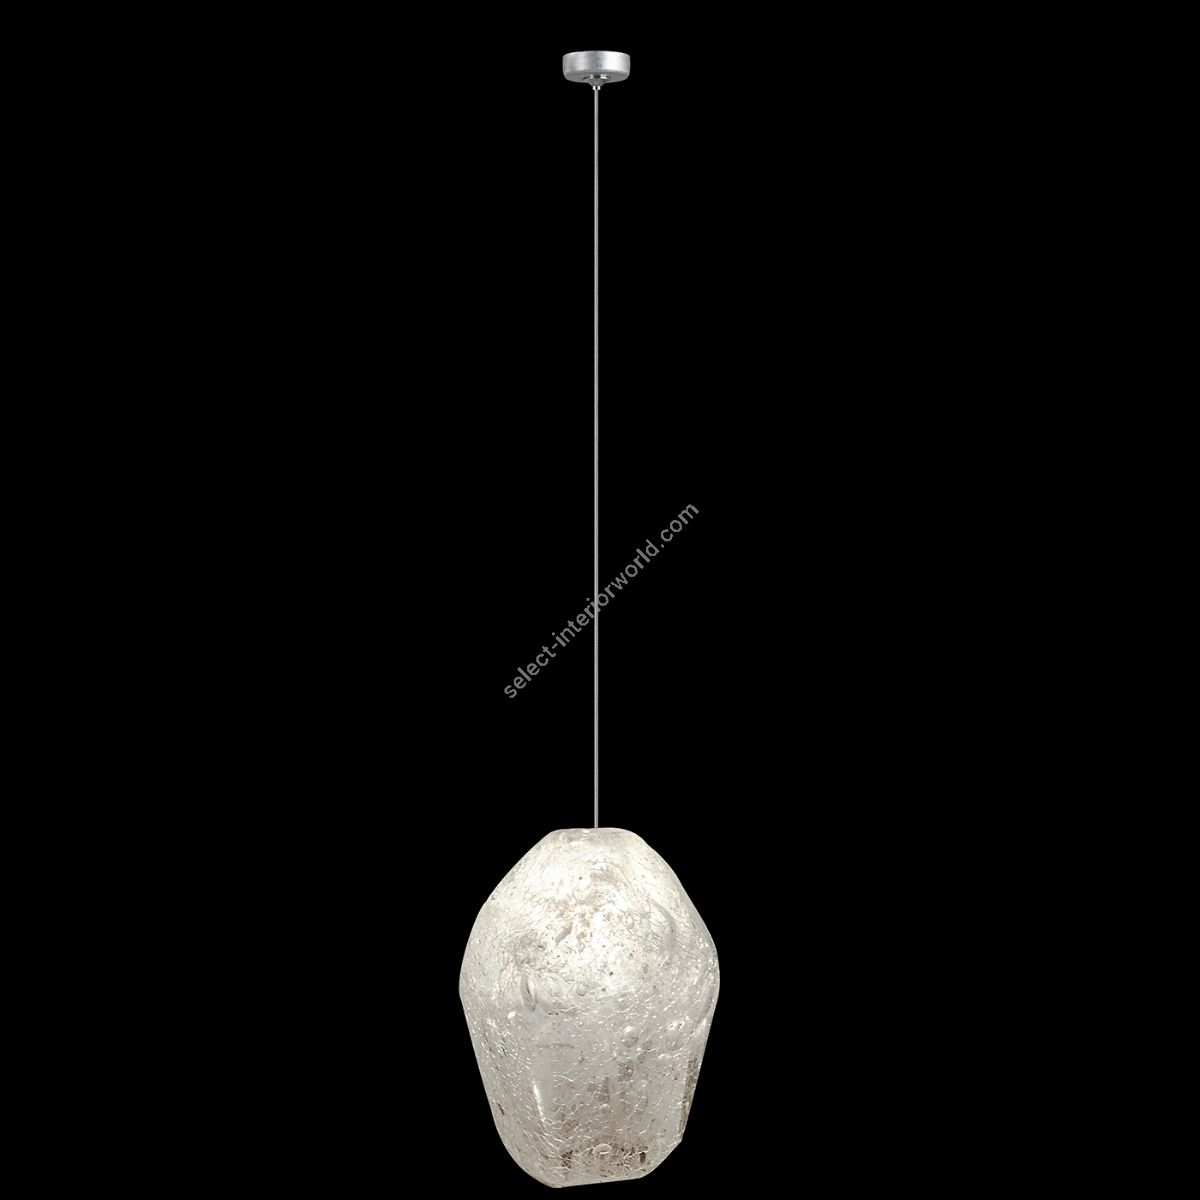 Natural Inspirations 4.75″ Round Drop Light 851840-13L, 17L, 23L, 27L by Fine Art Handcrafted Lighting